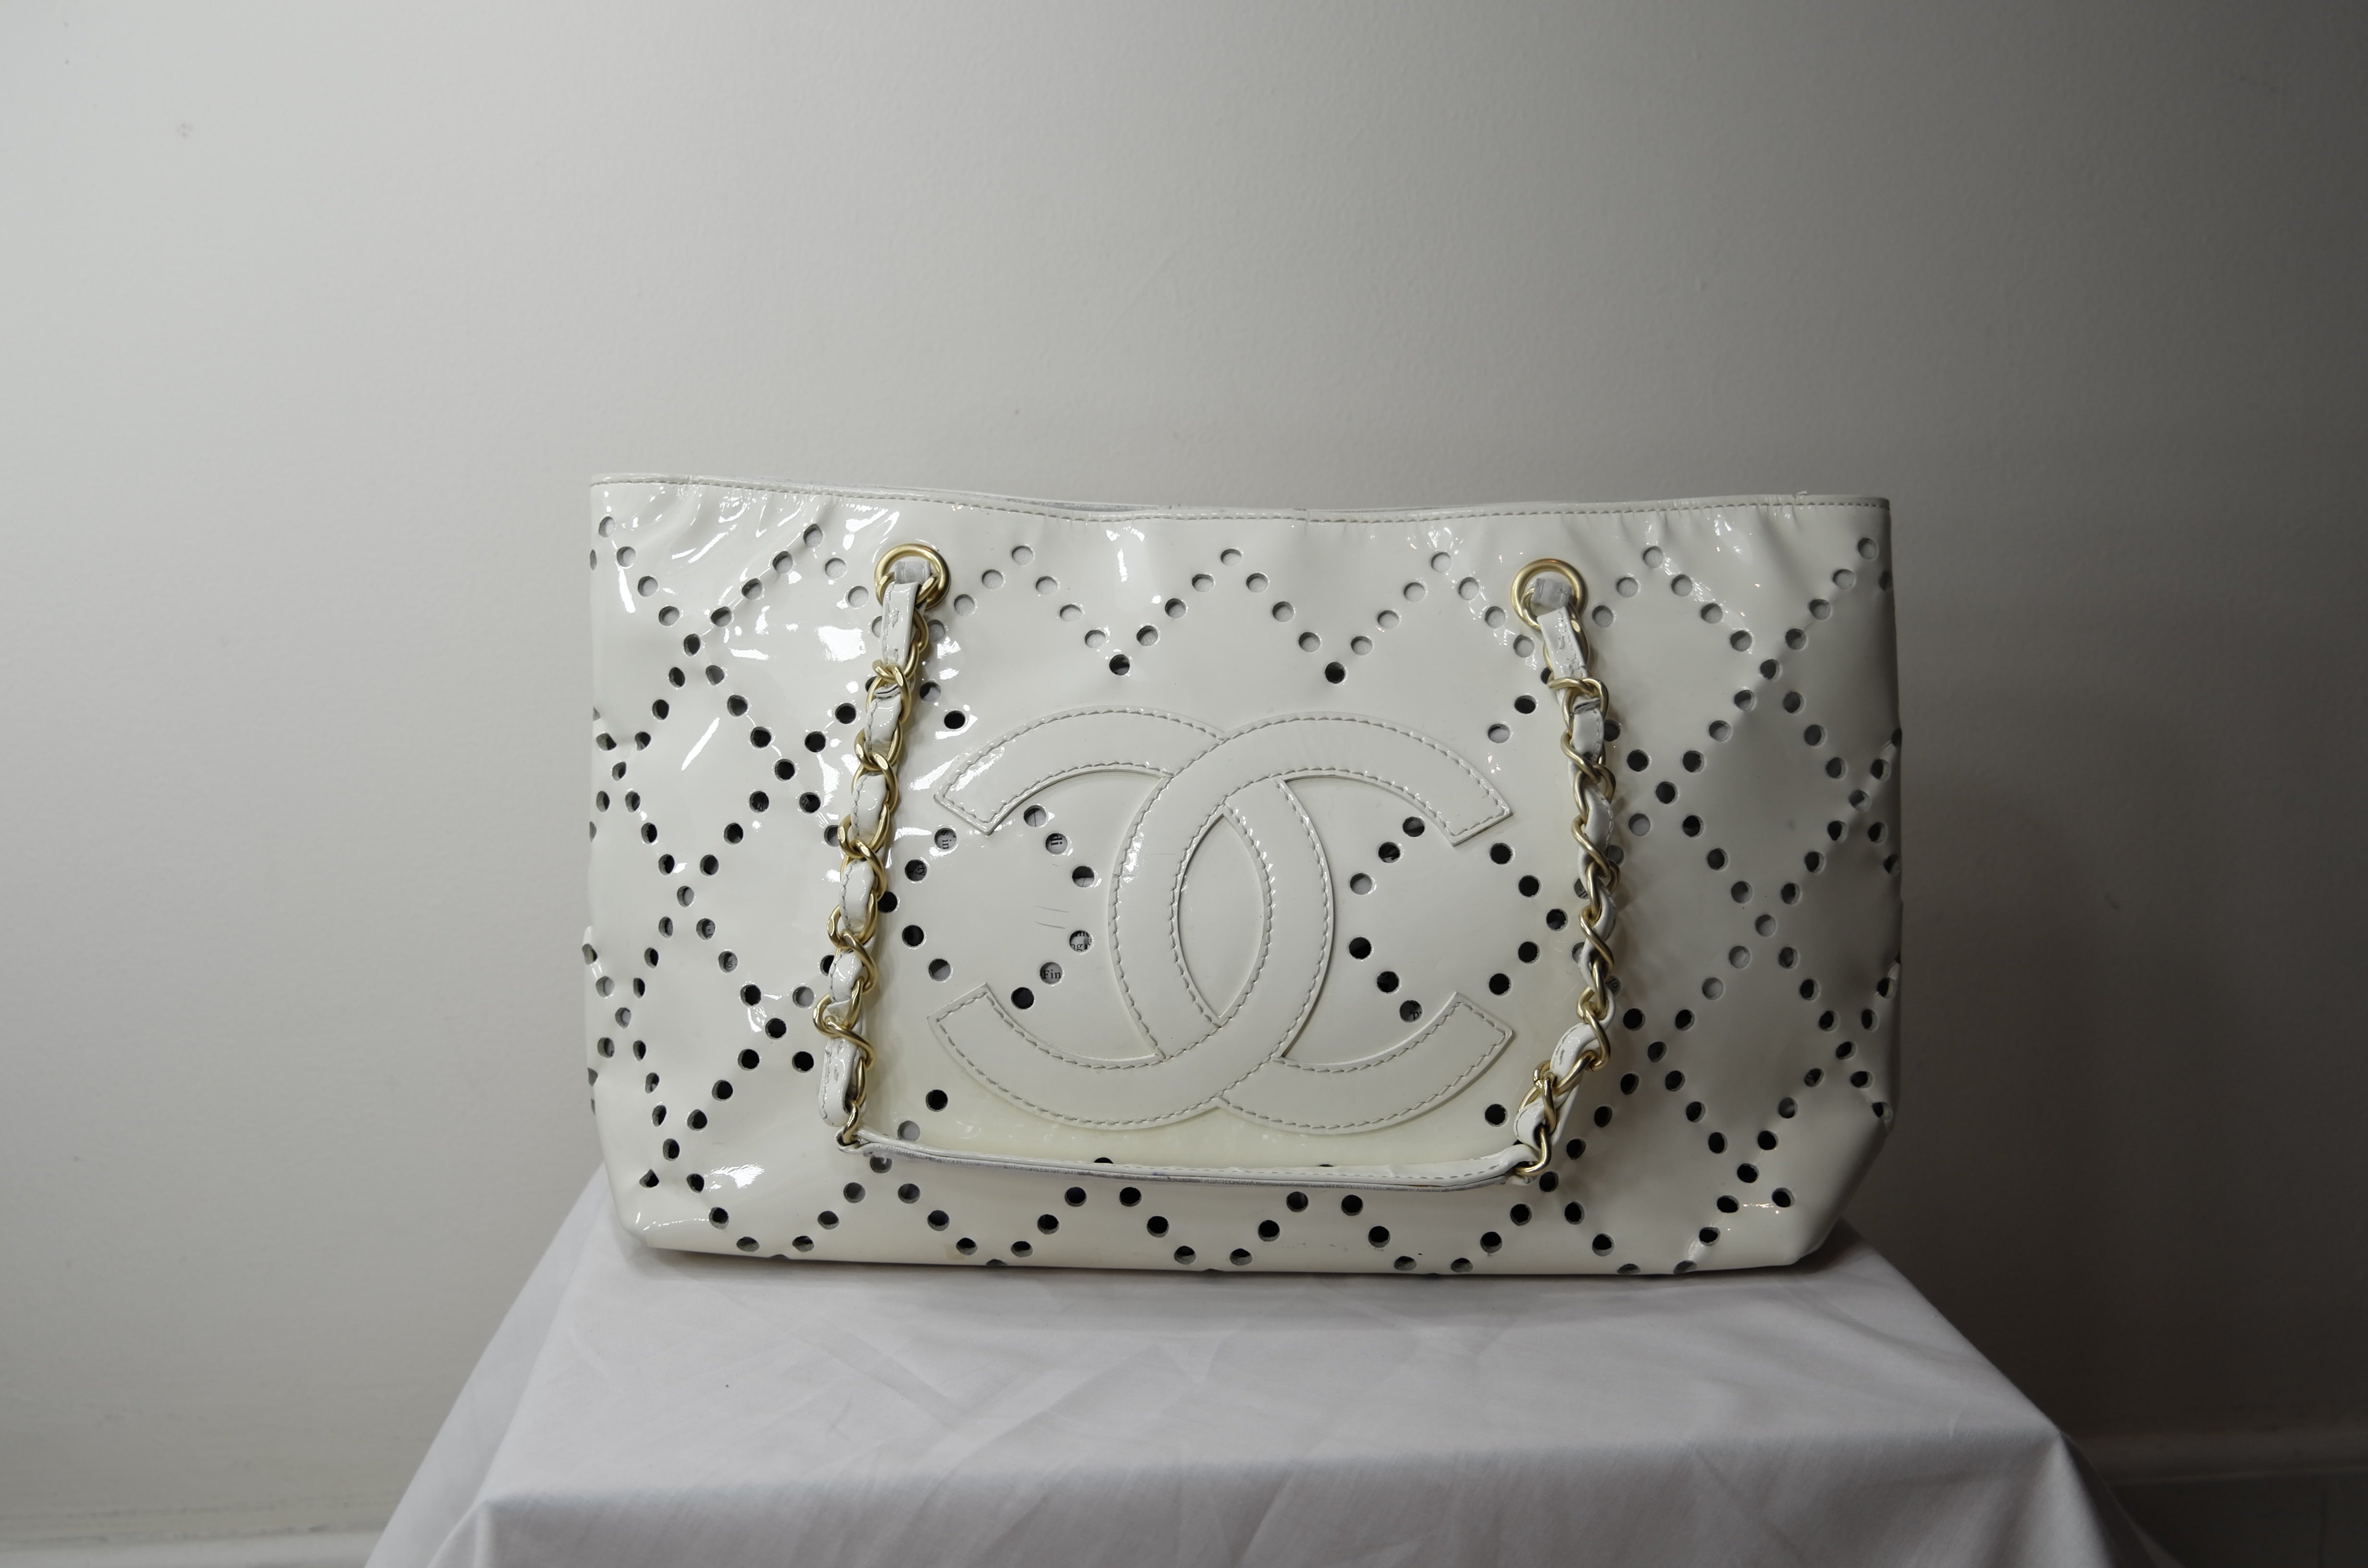 Chanel Large White Patent Leather Tote